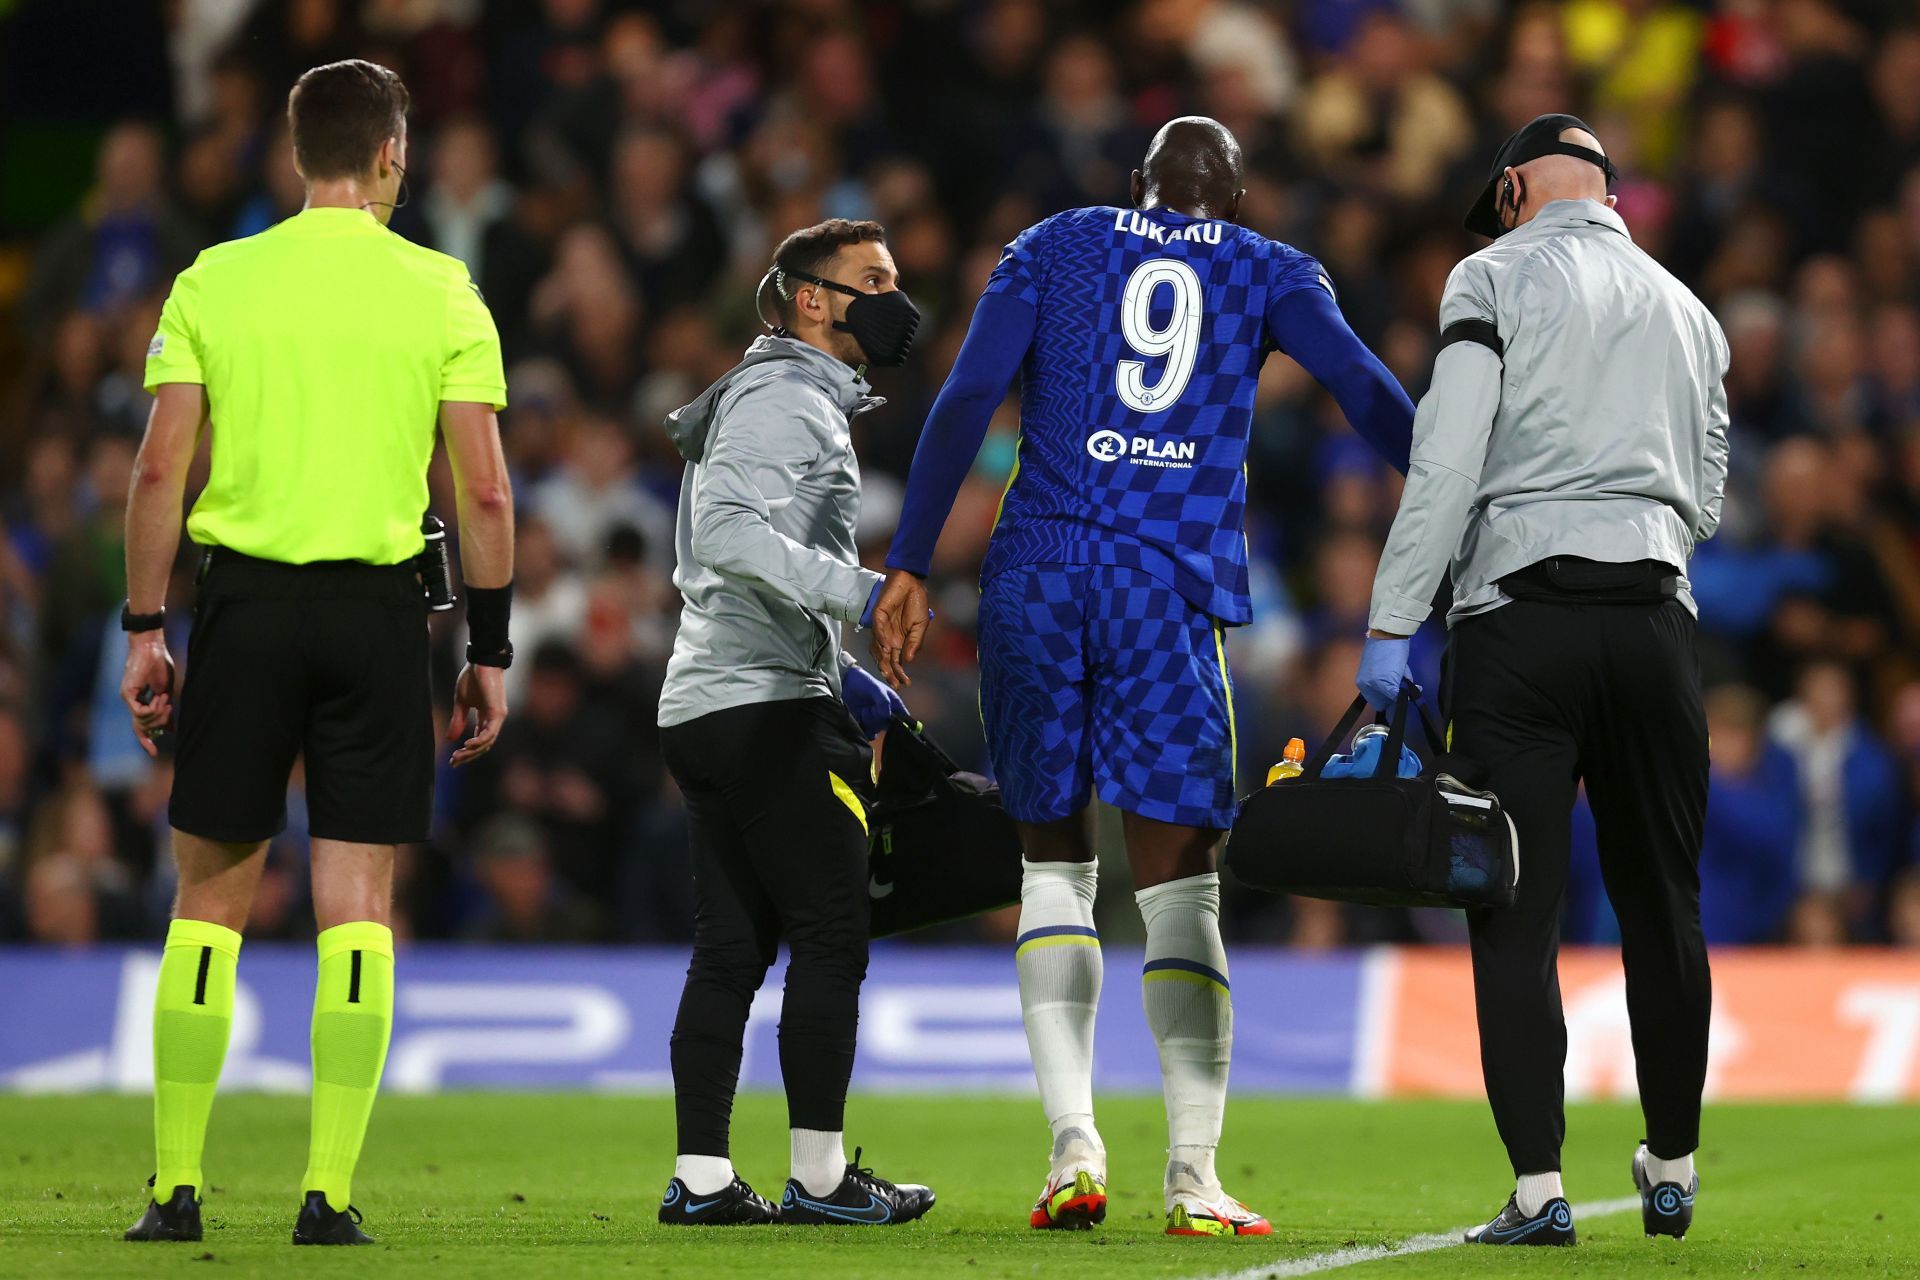 Chelsea striker Romelu Lukaku has been recently ruled out due to an ankle injury